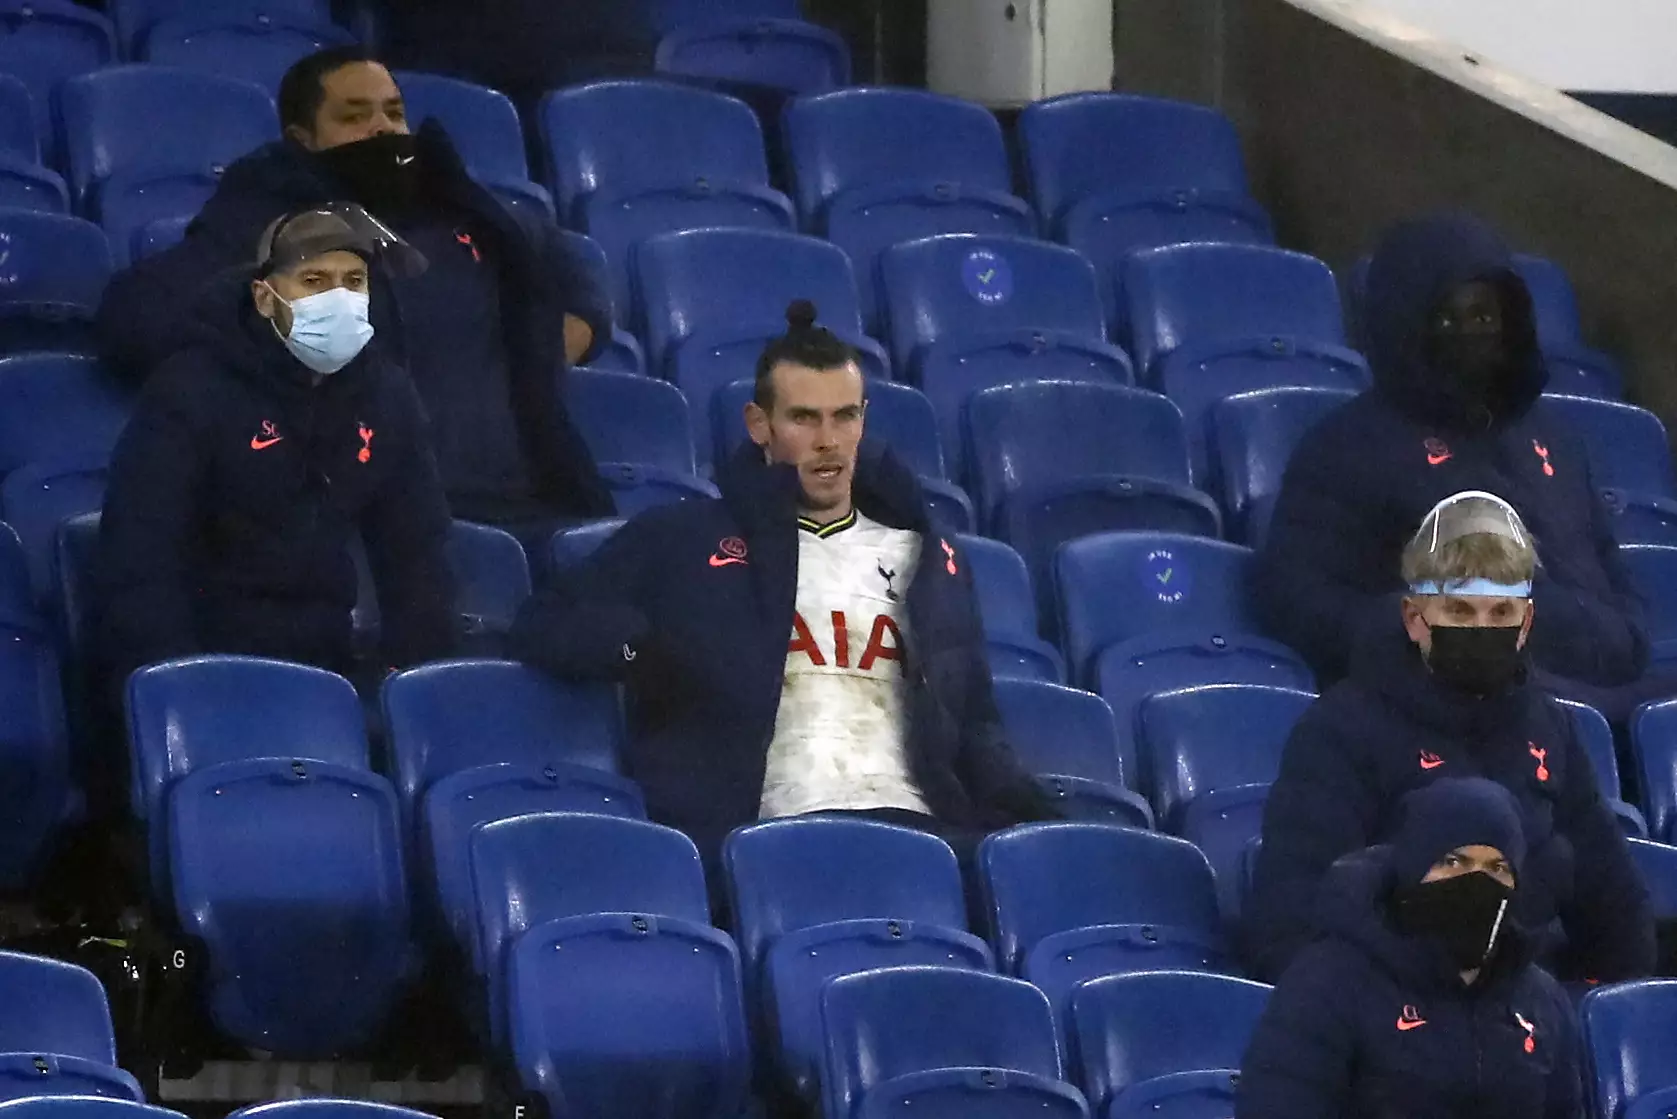 Gareth Bale can find comfort in his Instagram worth, despite spending much of his Spurs loan on the bench. Image: PA Images